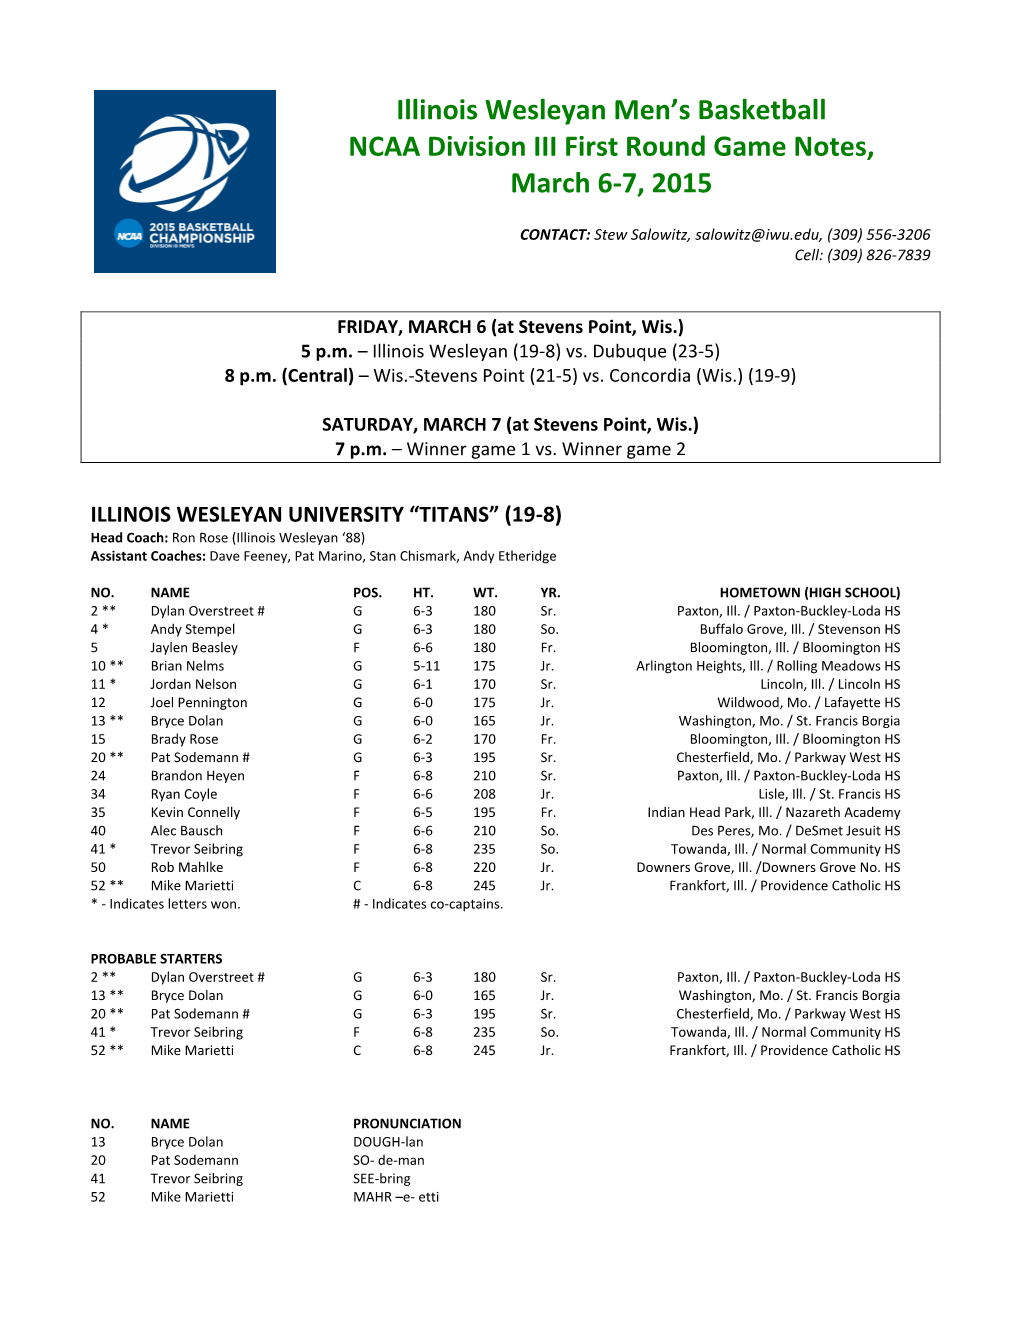 Illinois Wesleyan Men's Basketball NCAA Division III First Round Game